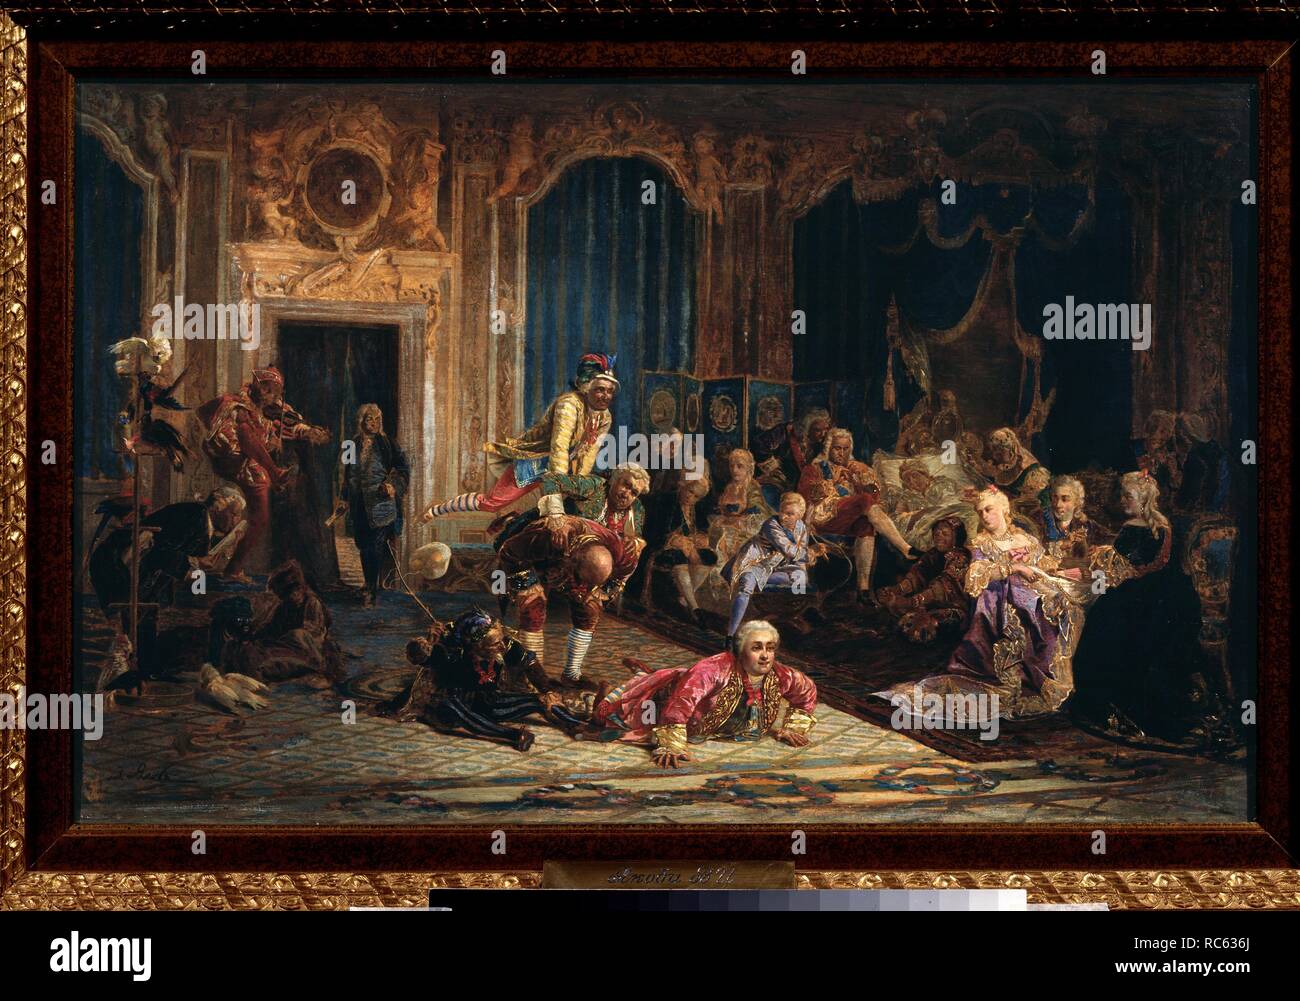 Jesters at the Court of Empress Anna Ioannovna. Museum: State S. Ersya Mordovian Art Museum, Saransk. Author: Jacobi, Valery Ivanovich. Stock Photo